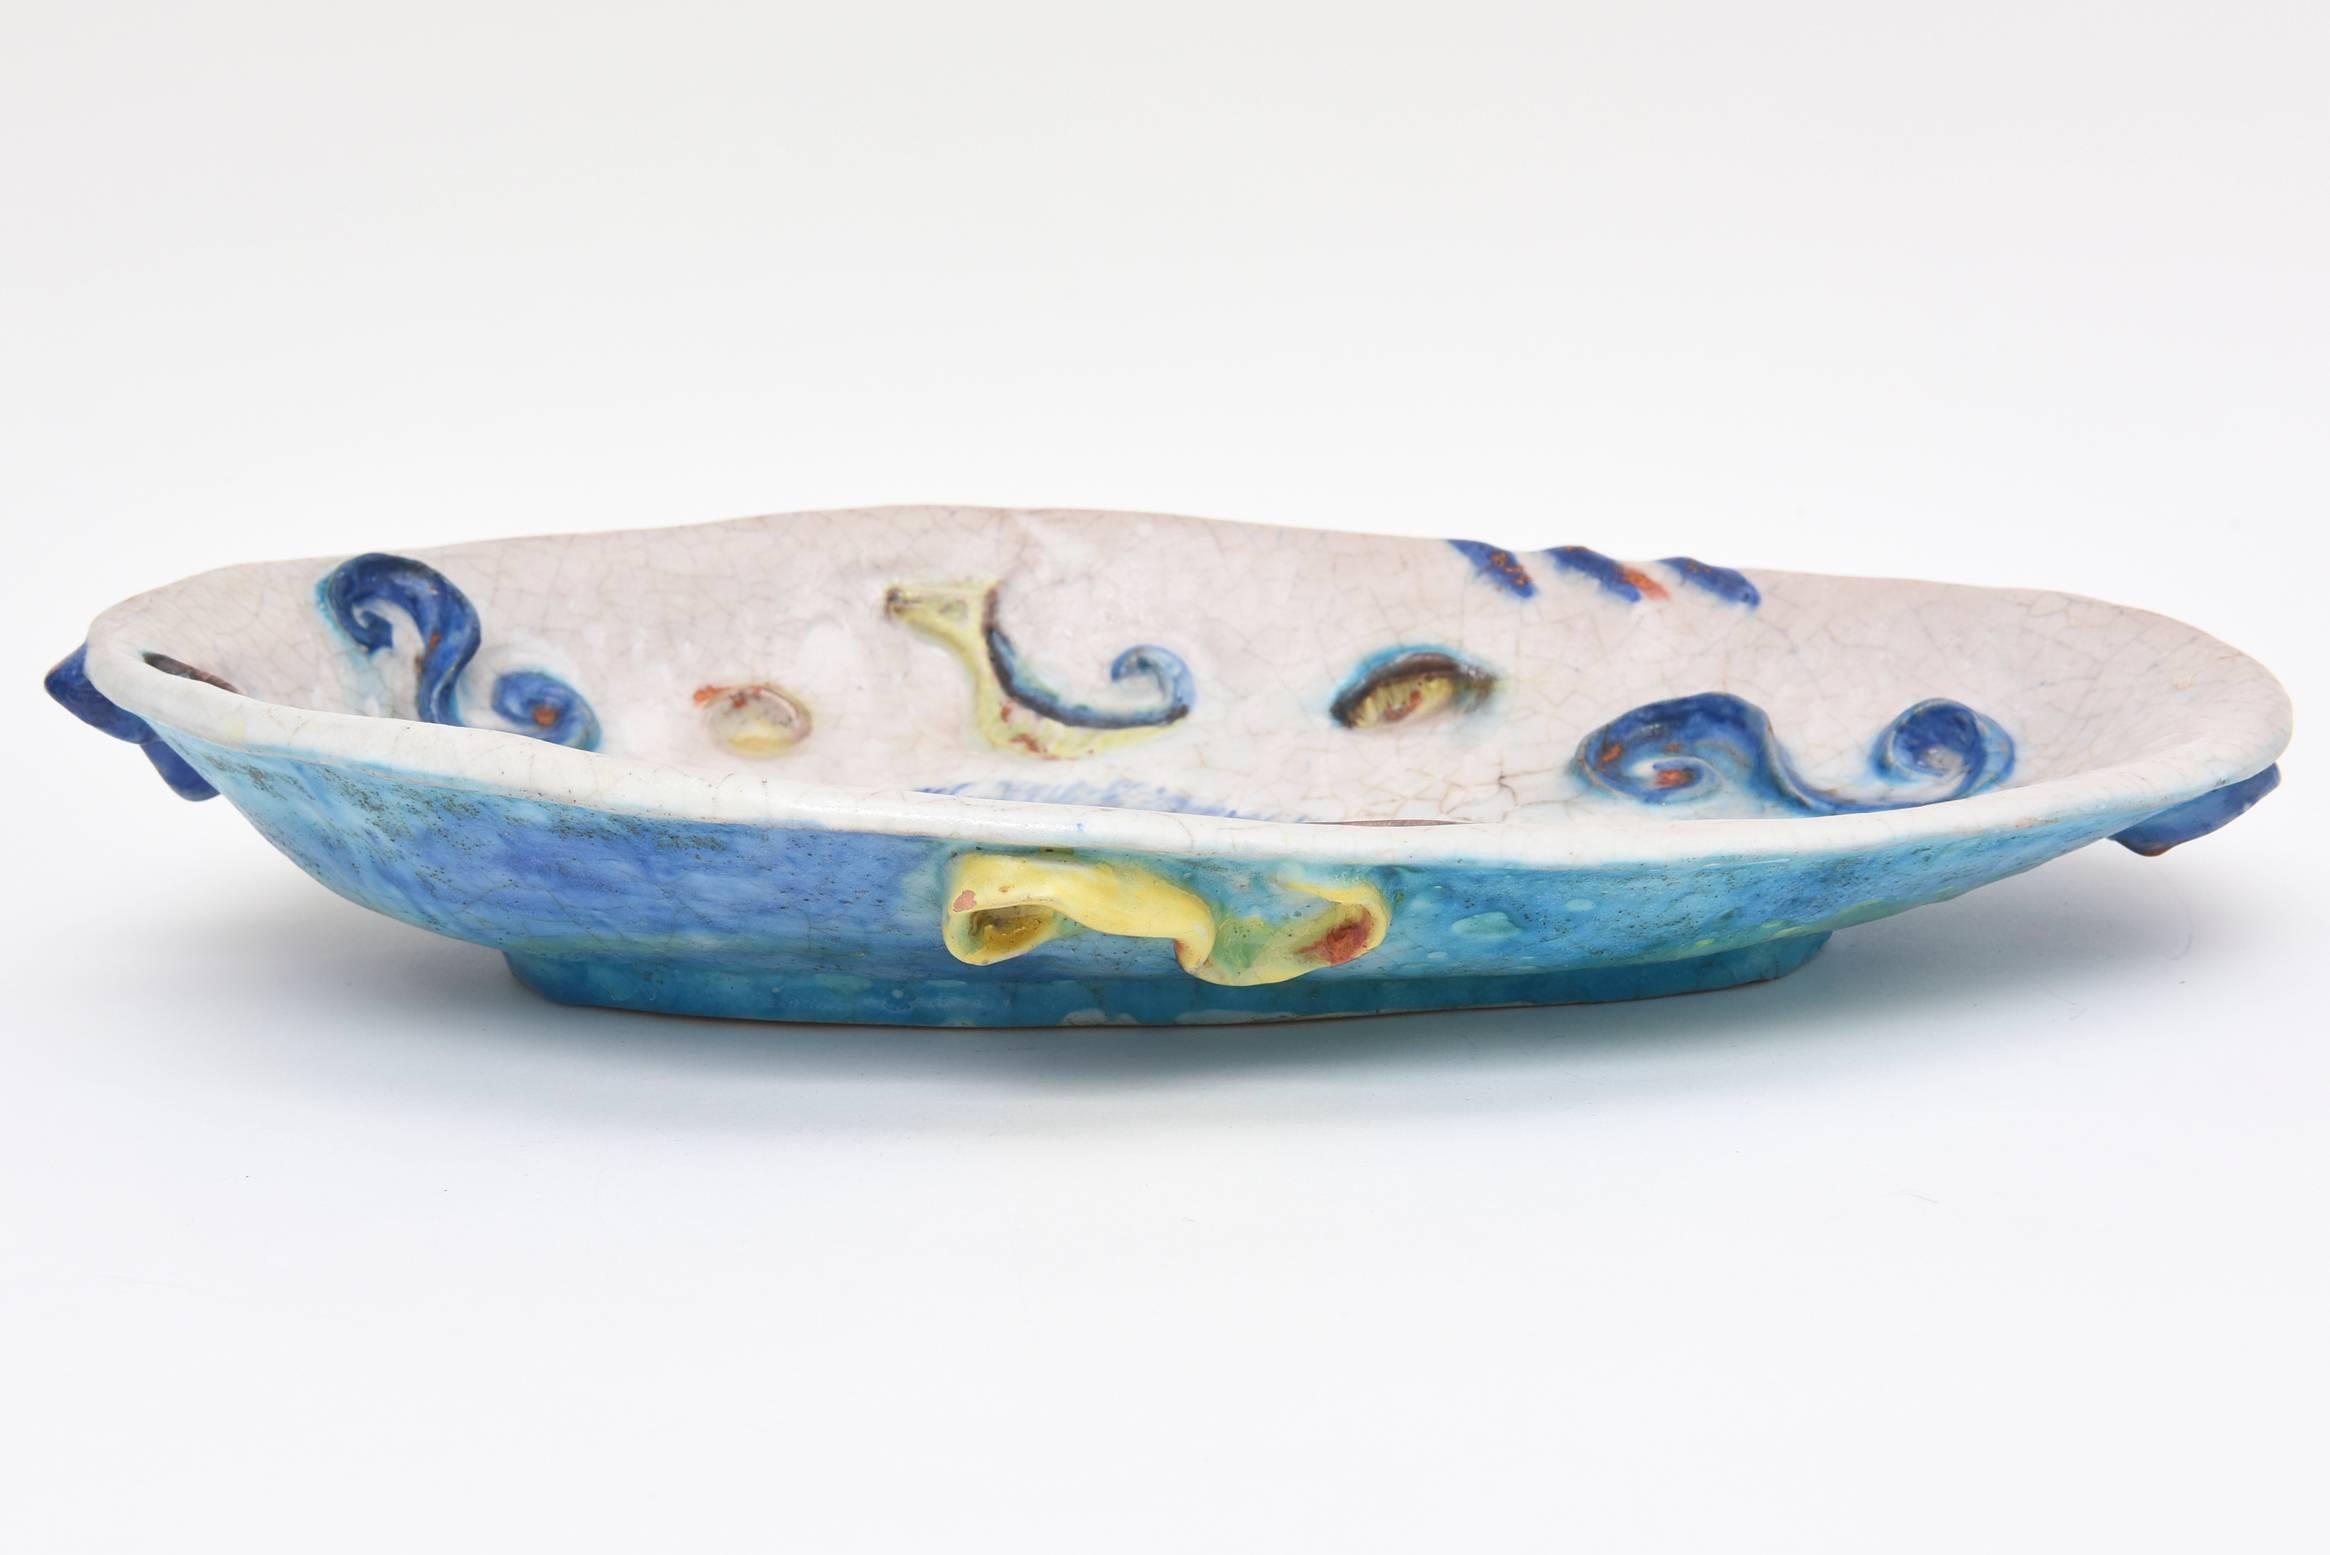 This Italian amazing, textural and dimensional ceramic bowl by Fantoni is a studio piece. It is even entitled "Chantal."
This is a rare work of his. It is monumental in size.
The colors and layers of salt glaze are sensational. It has